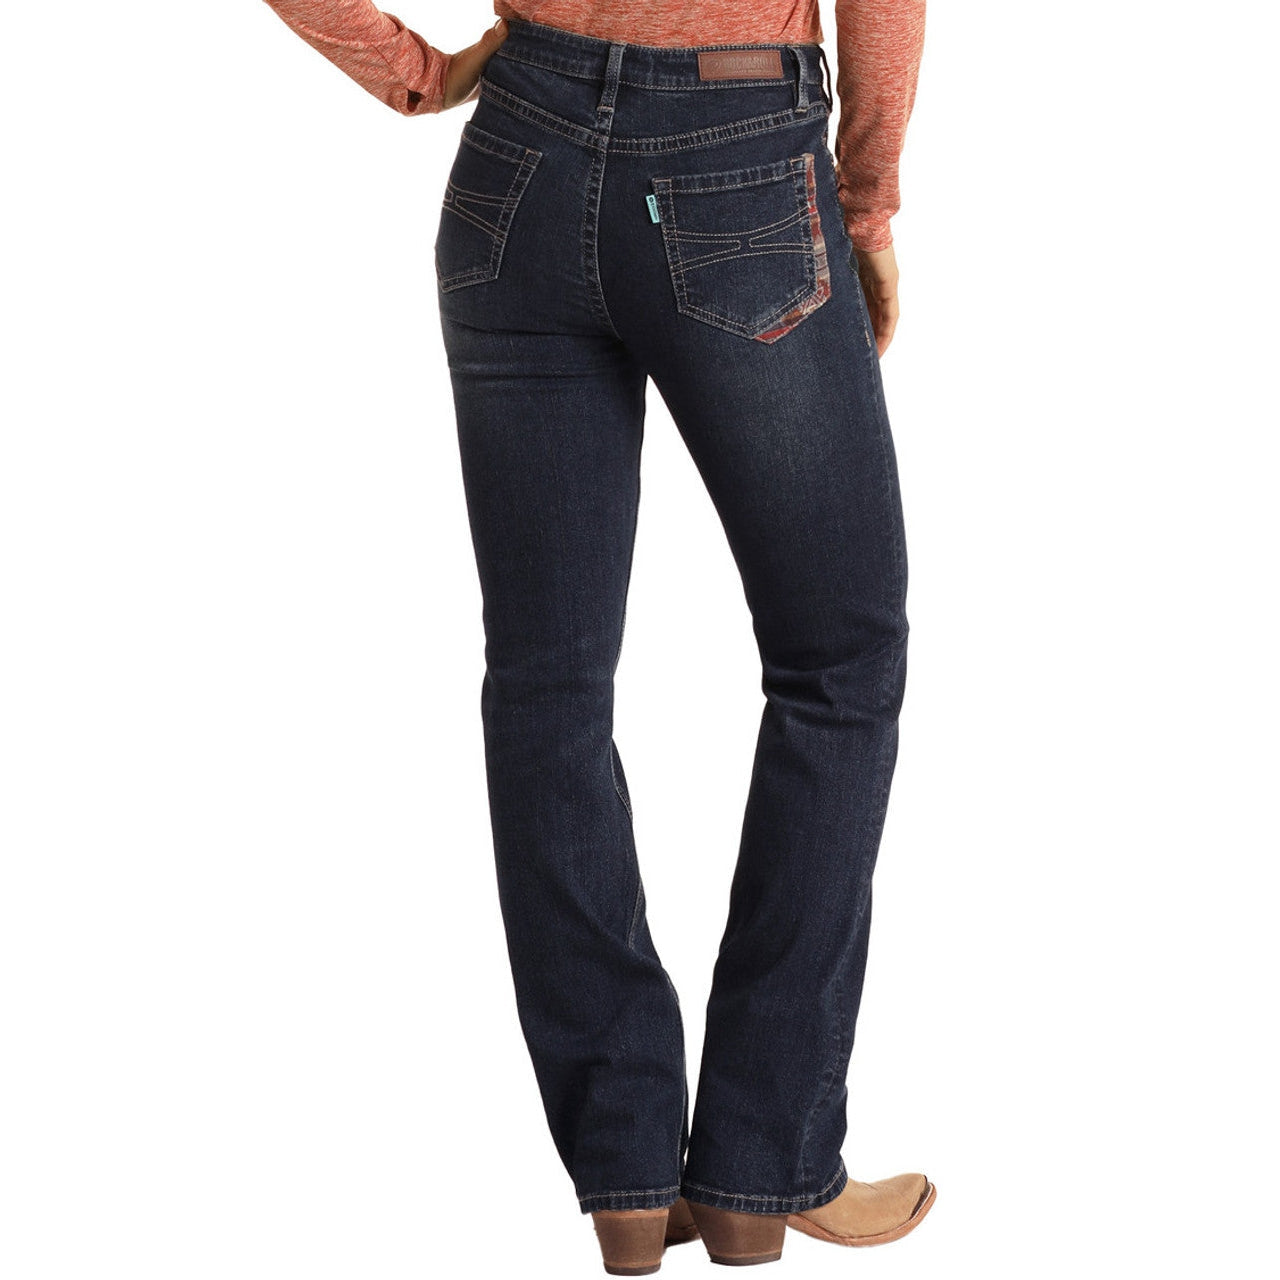 Hooey Women's High Rise Extra Stretch Bootcut Jeans - Dark Vintage